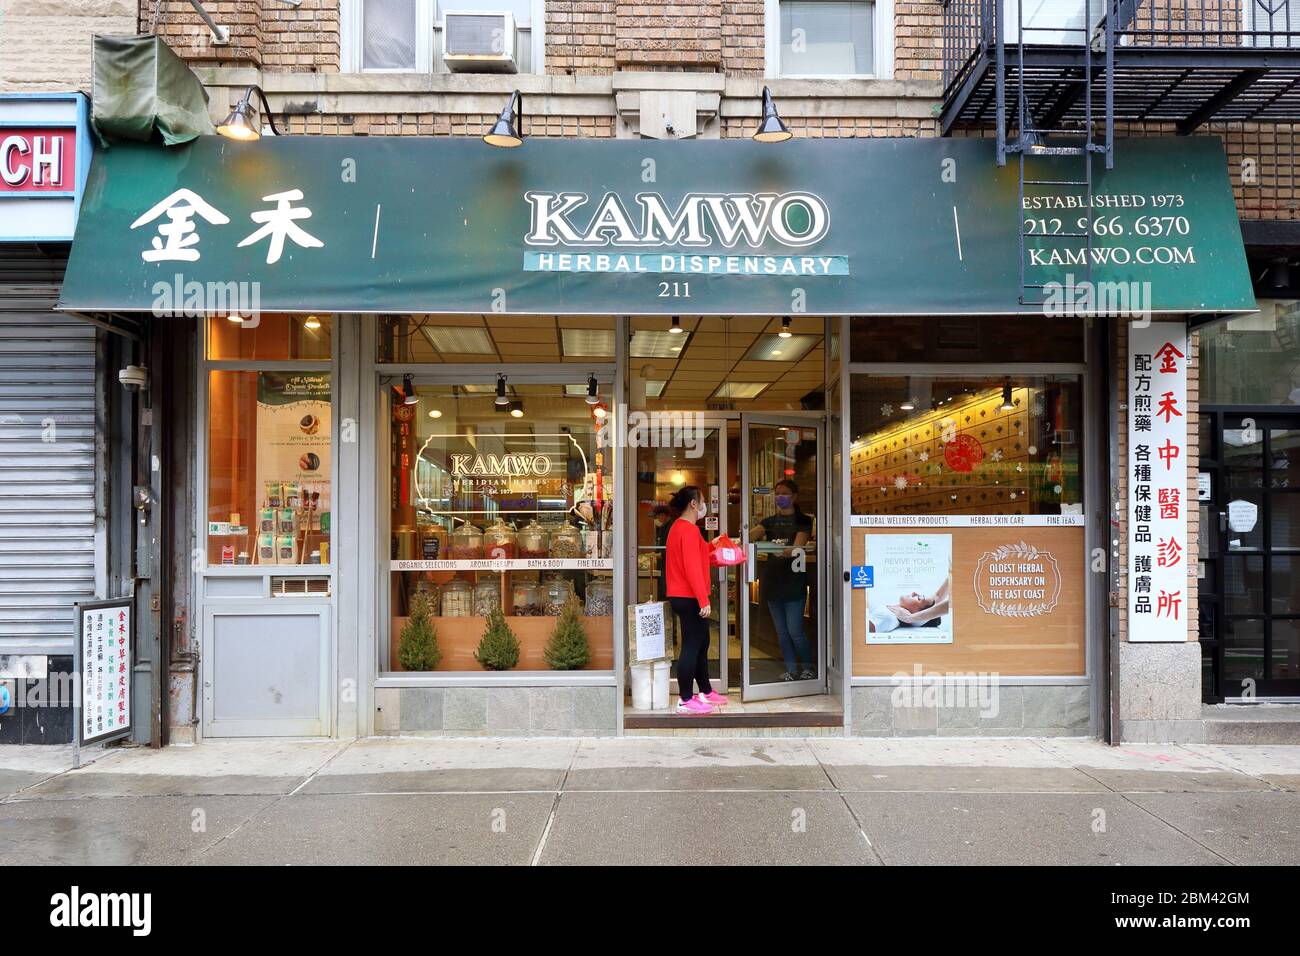 A person picks up herbal medicine from Kamwo in New York Chinatown open for pickup service due to coronavirus... SEE MORE INFO FOR FULL CAPTION Stock Photo